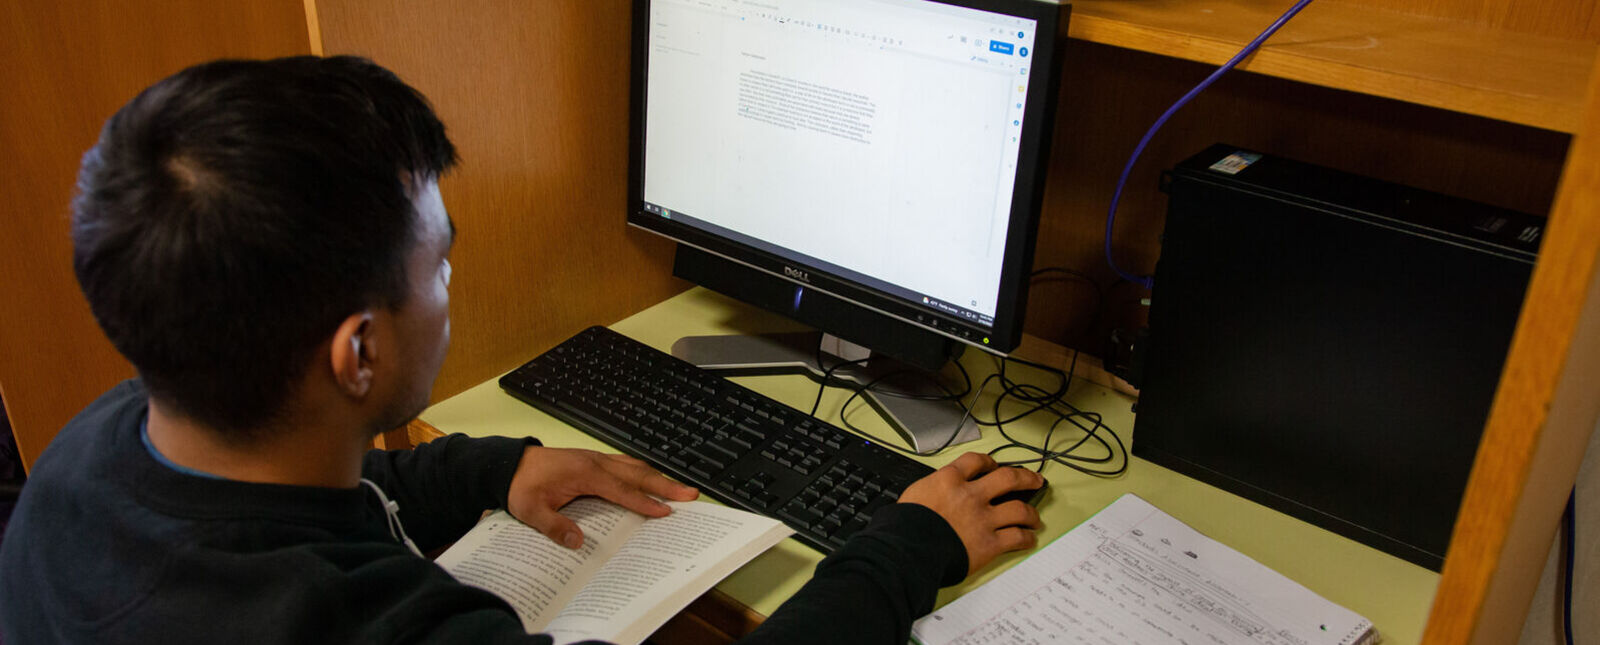 A male student works at a computer